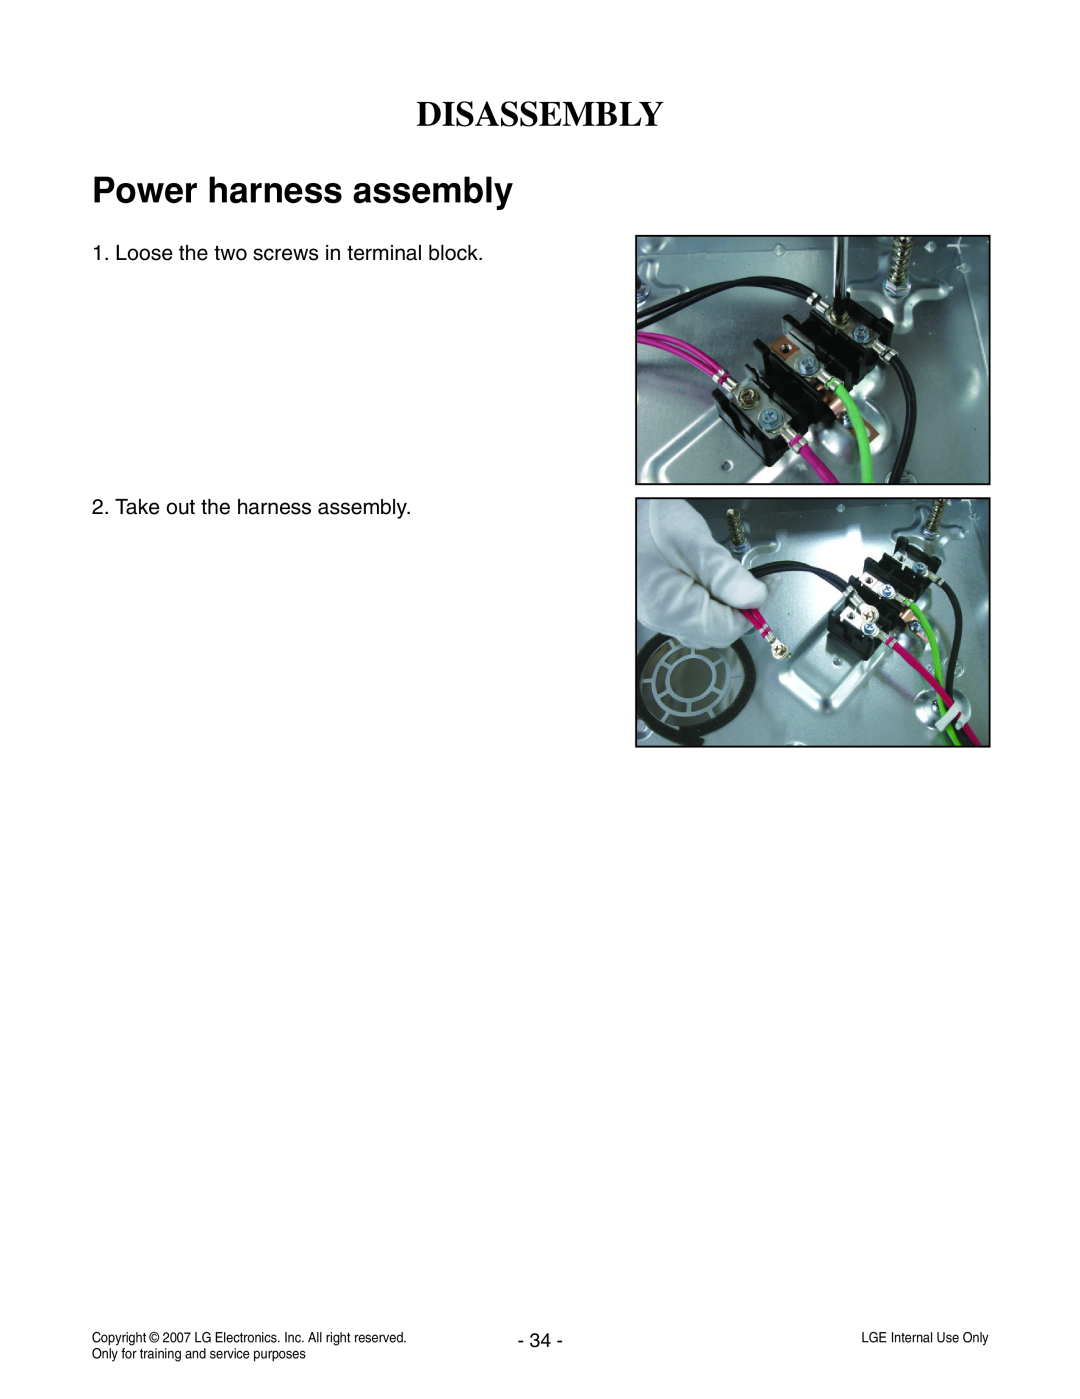 LG Electronics LCE30845 service manual Power harness assembly, Disassembly, Loose the two screws in terminal block 